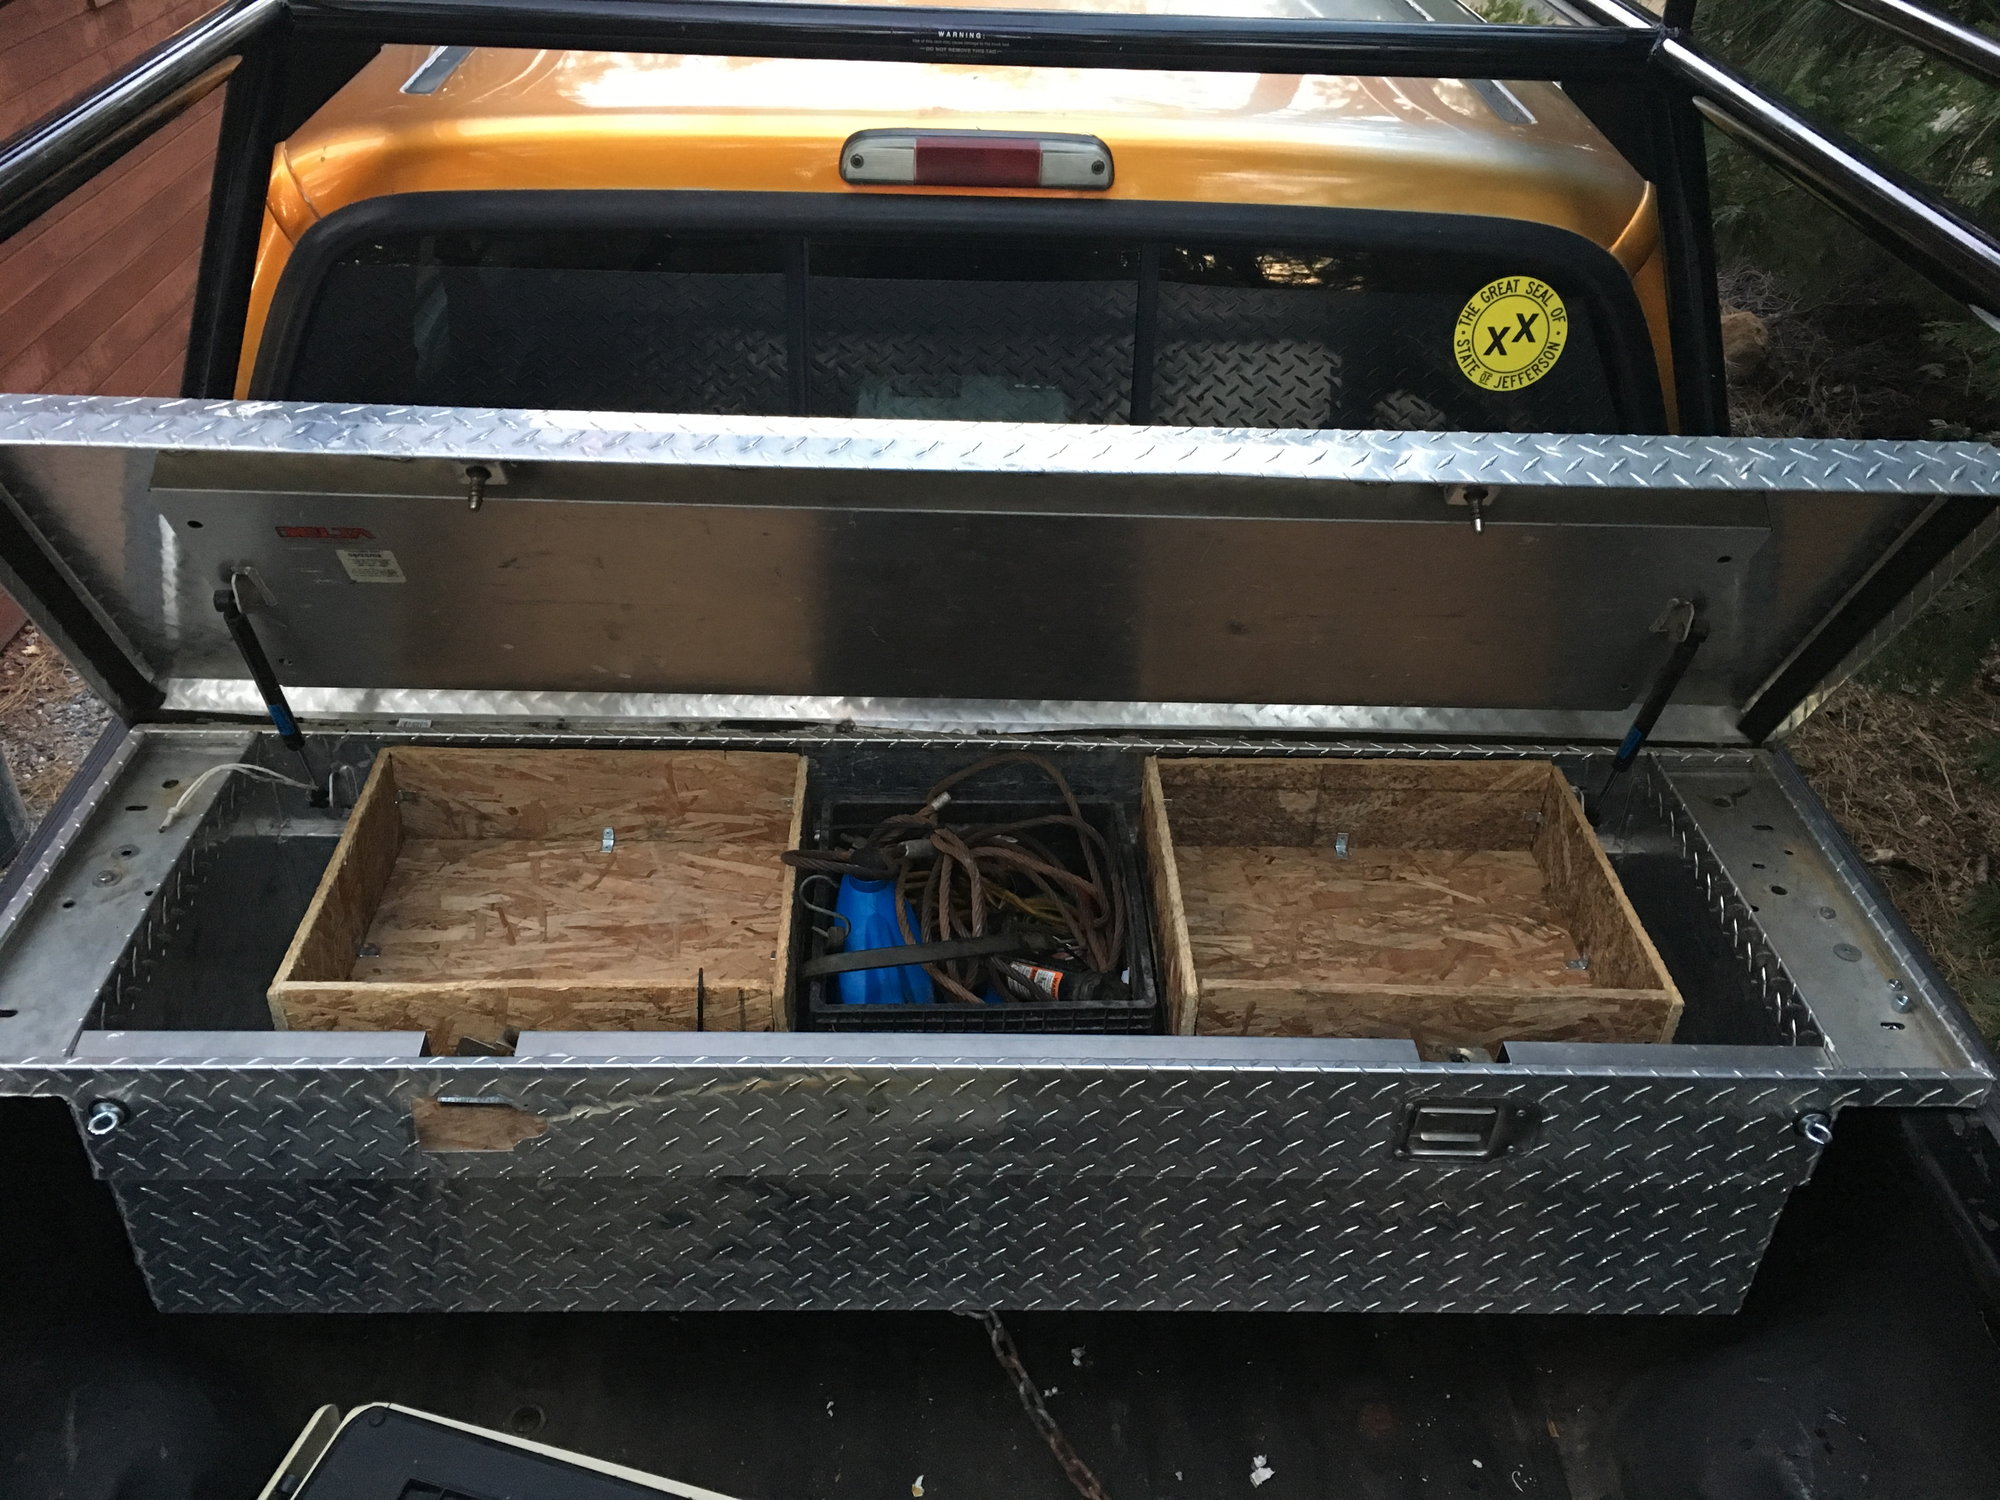 Post your truck bed tool boxs - Ford Truck Enthusiasts Forums